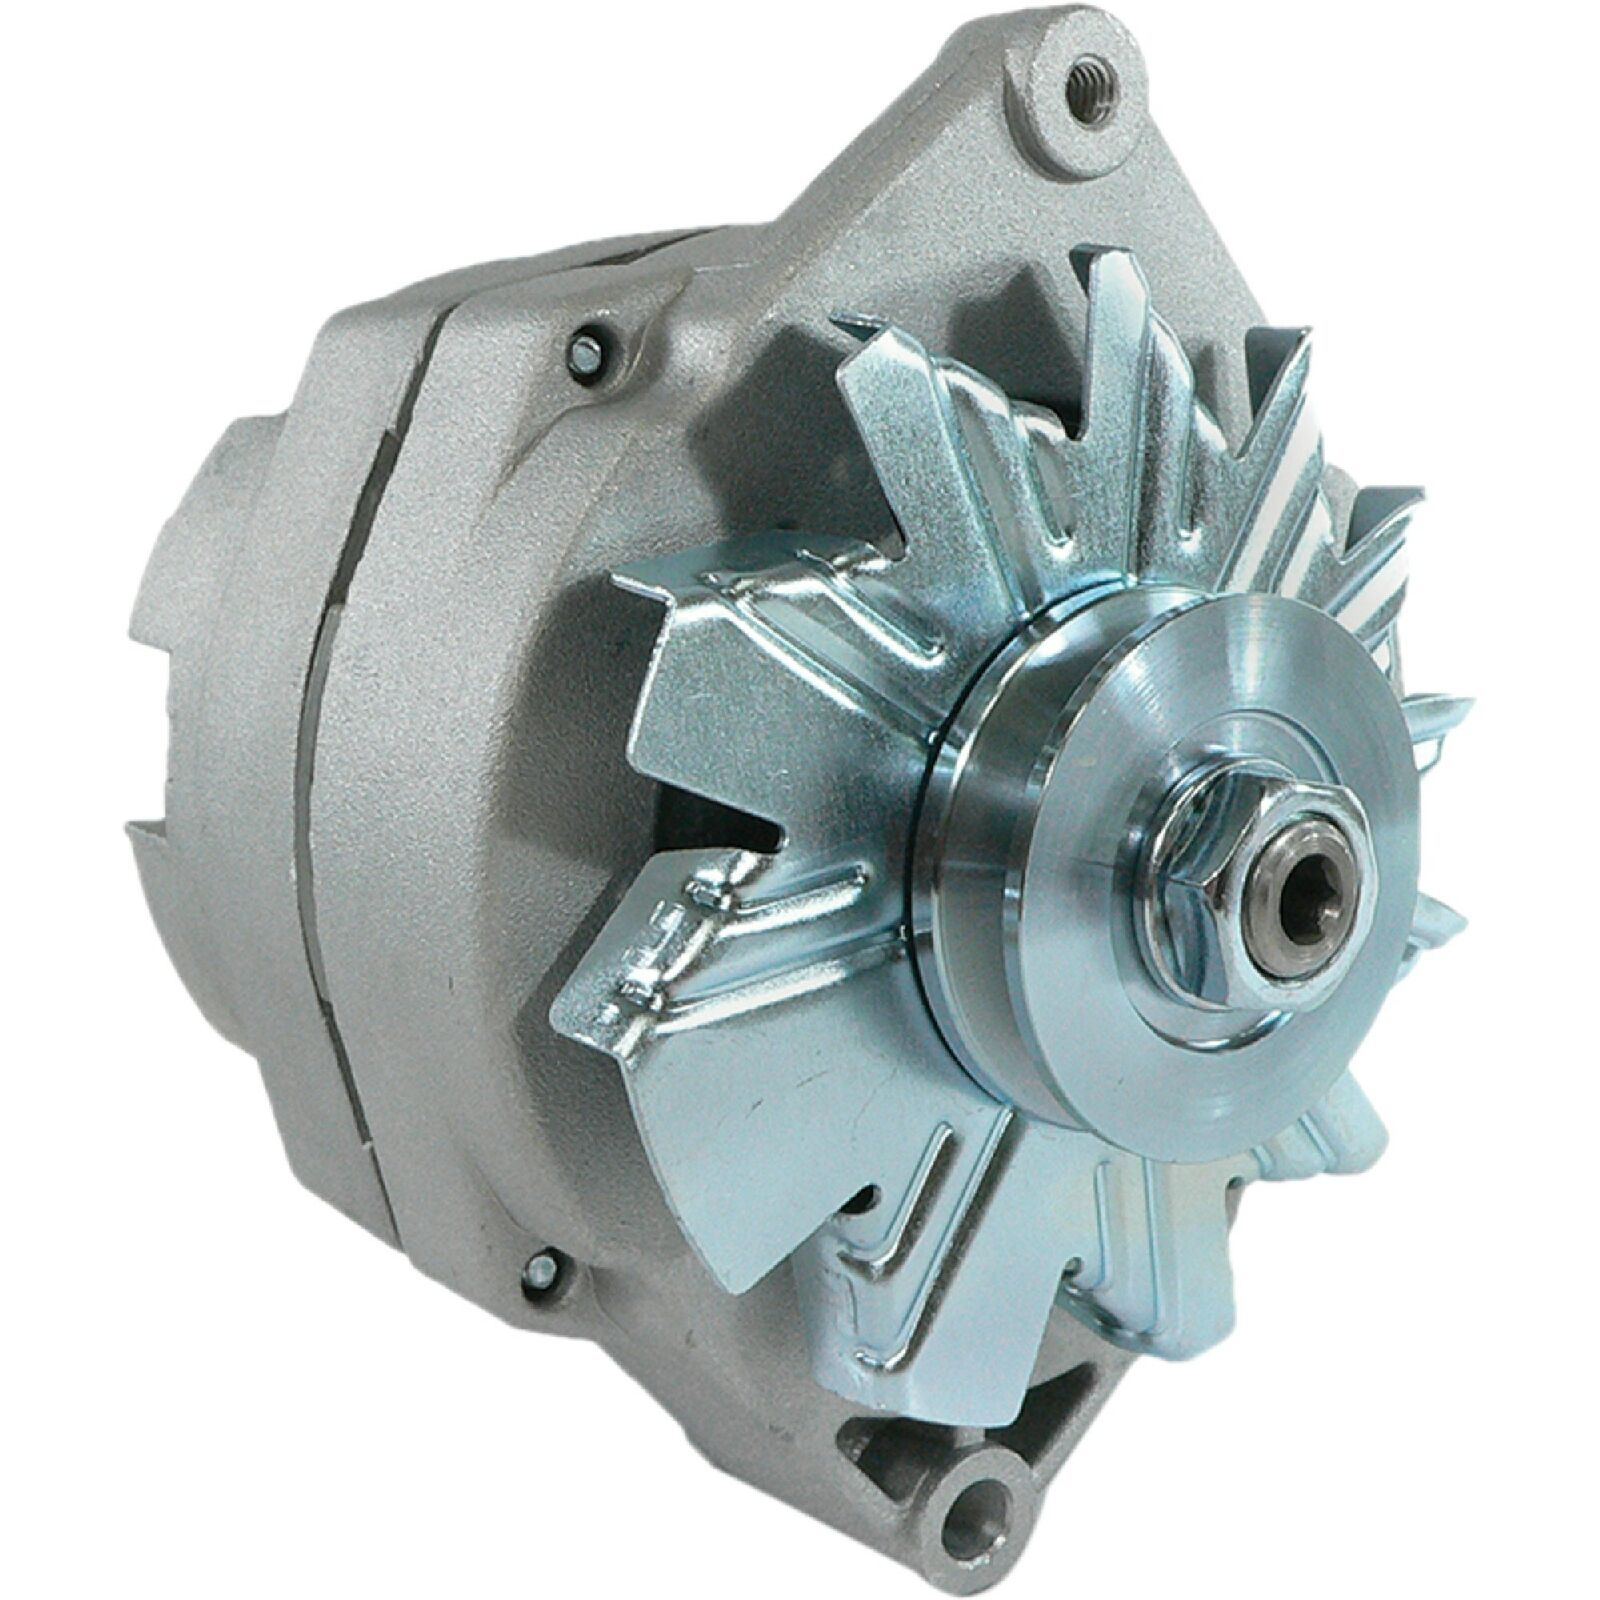 Alternator For Chevy High Output 105 Amp 3-Wire 1965-1985 7127-105; 400-12405